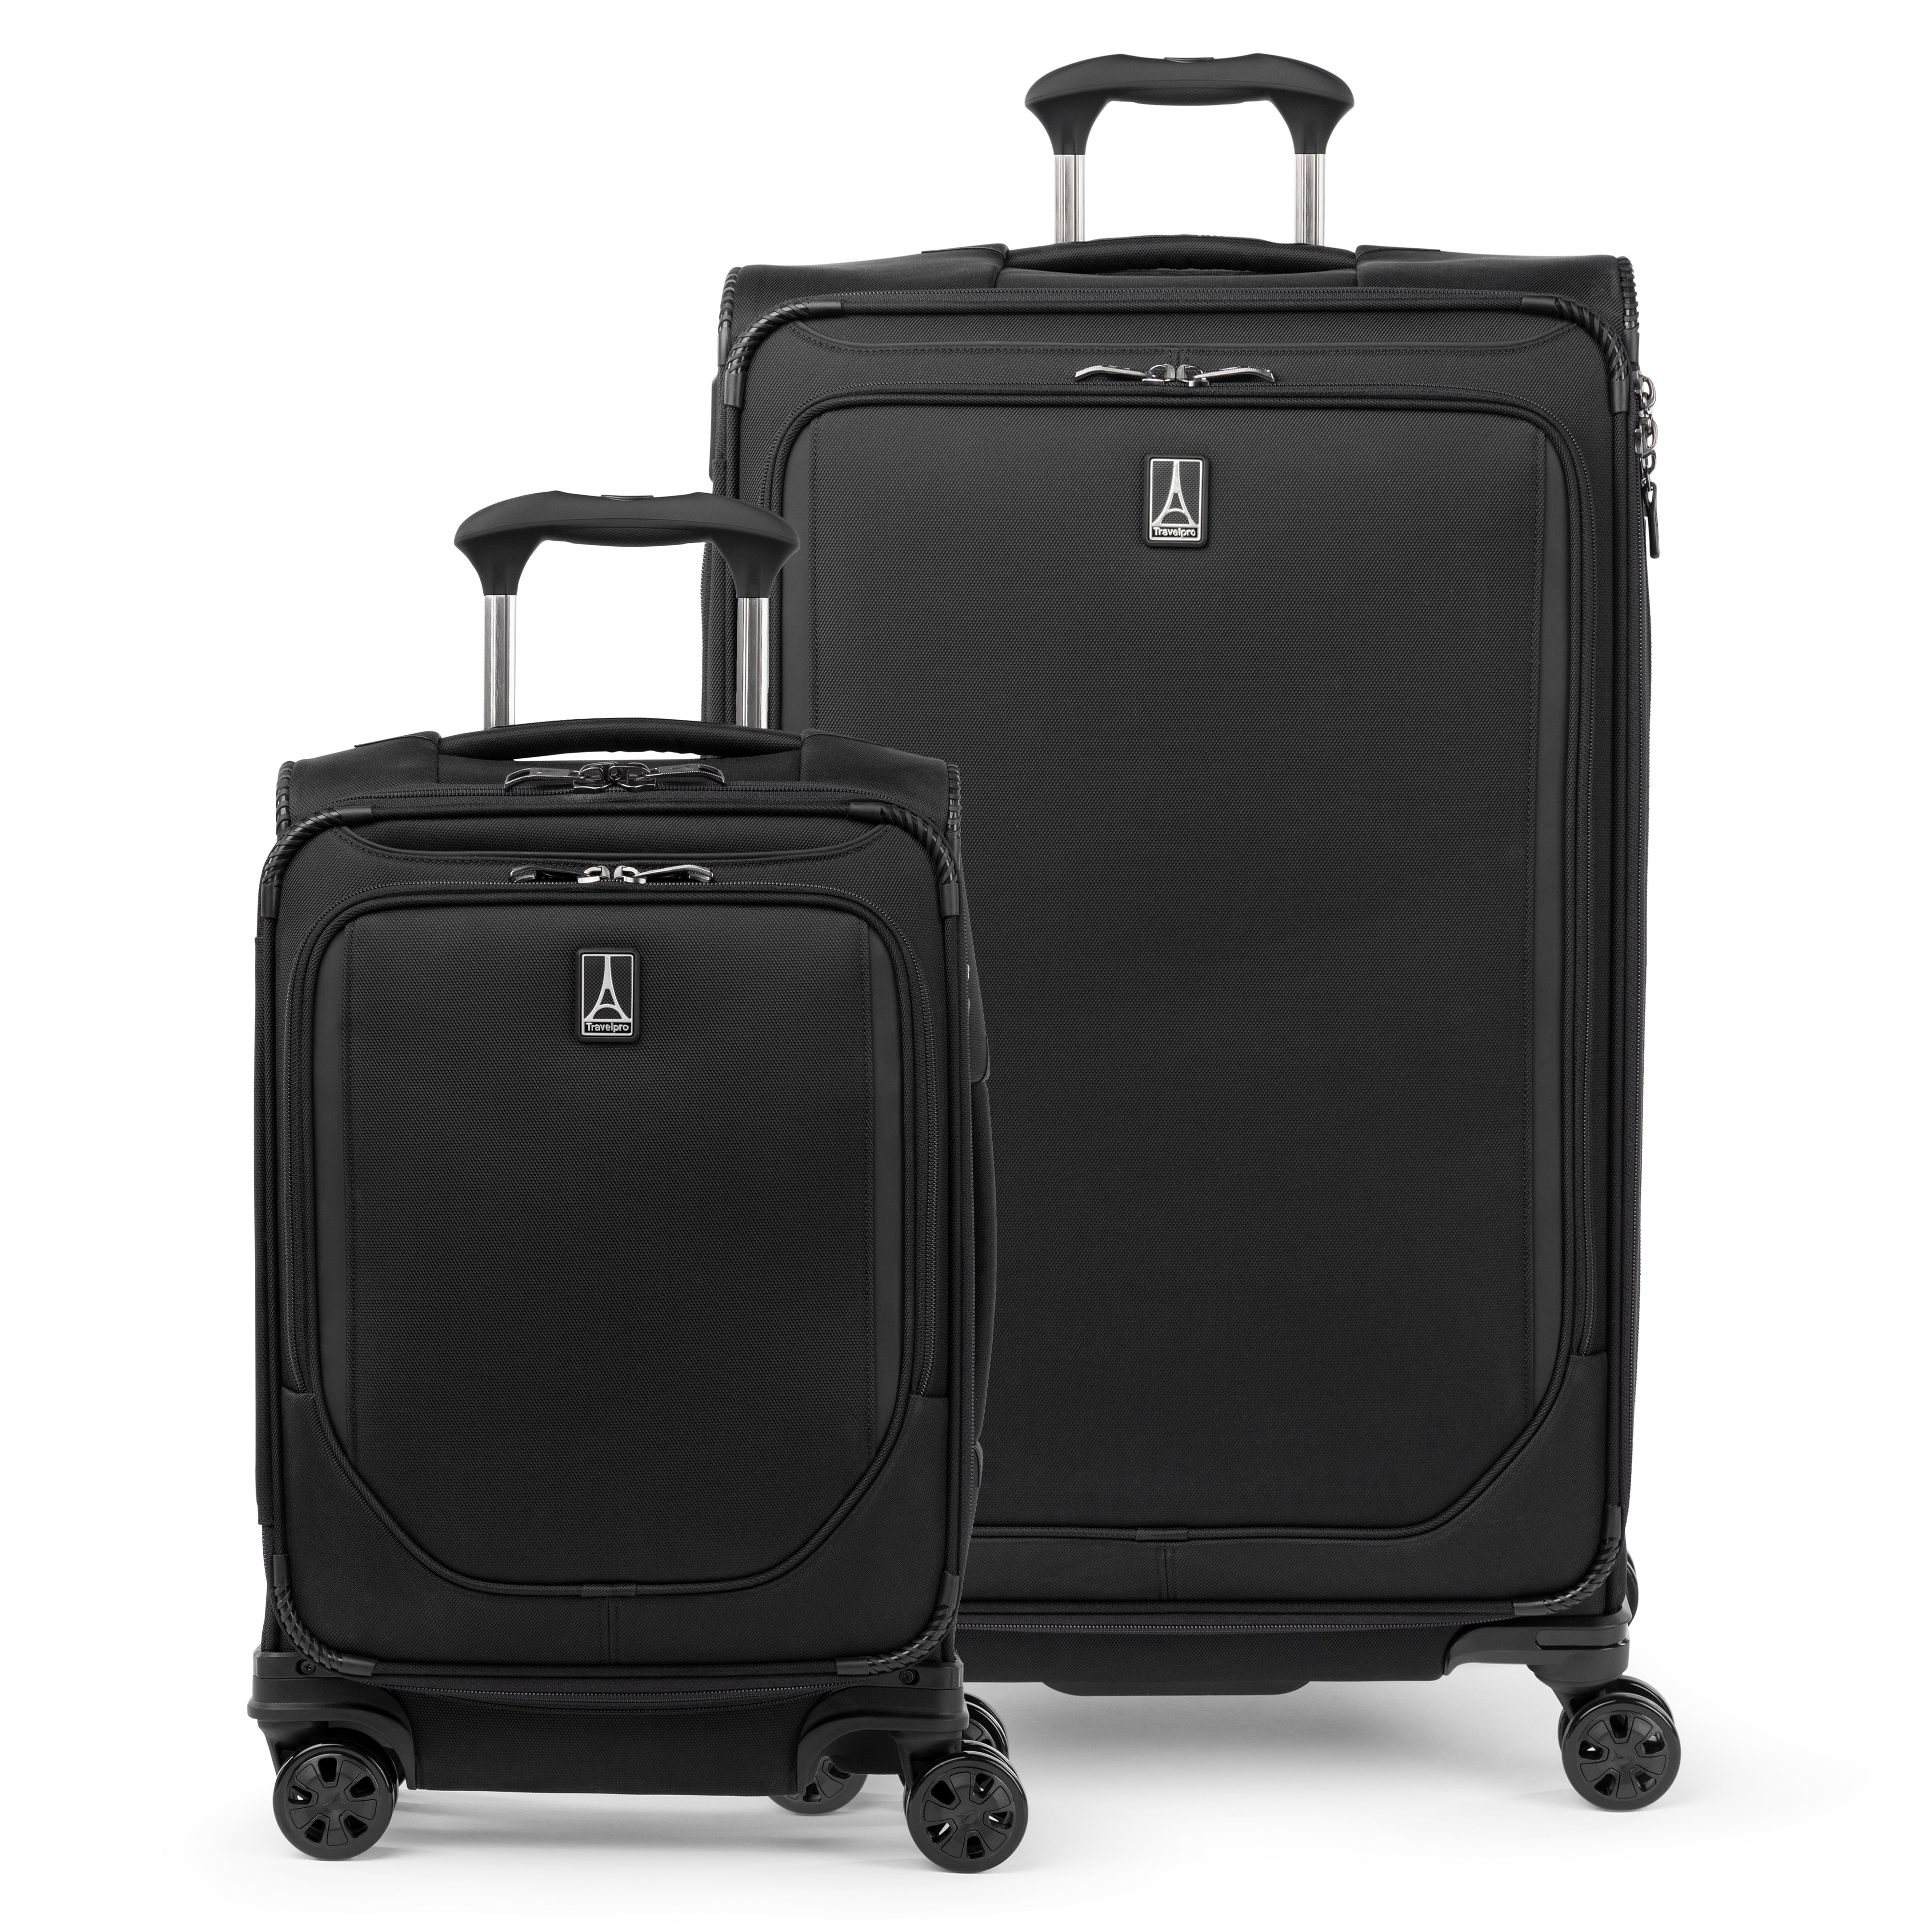 Crew™ Classic Compact Carry-On / Large Check-in Luggage Set